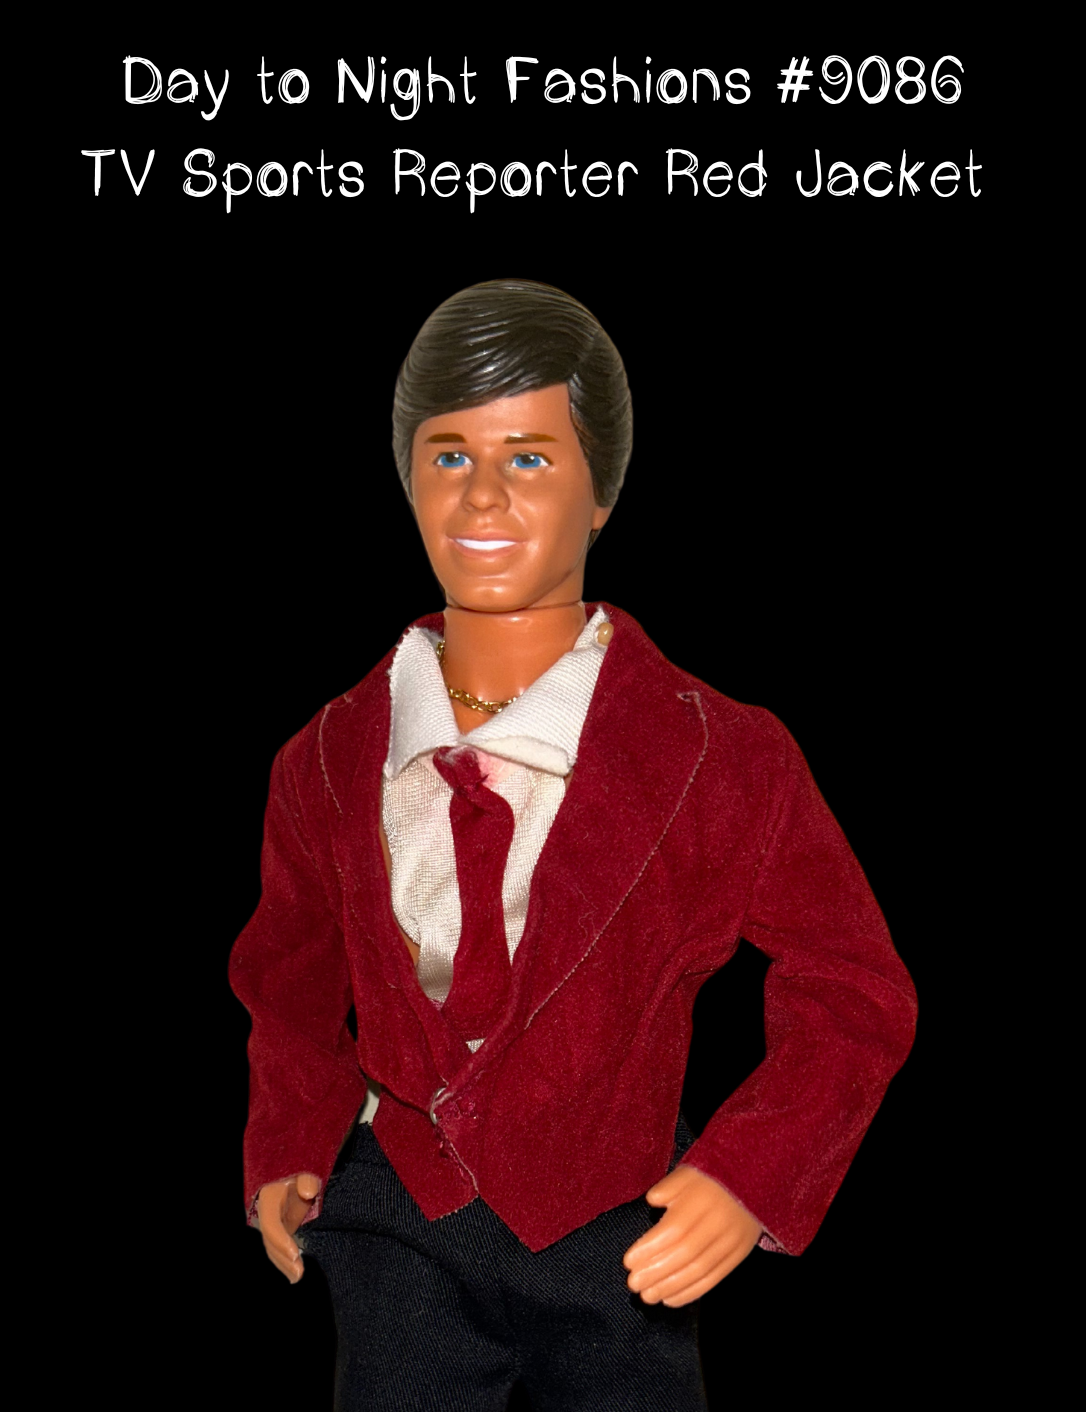 1985 Day to Night Fashions #9086 TV Sports Reporter Red Jacket